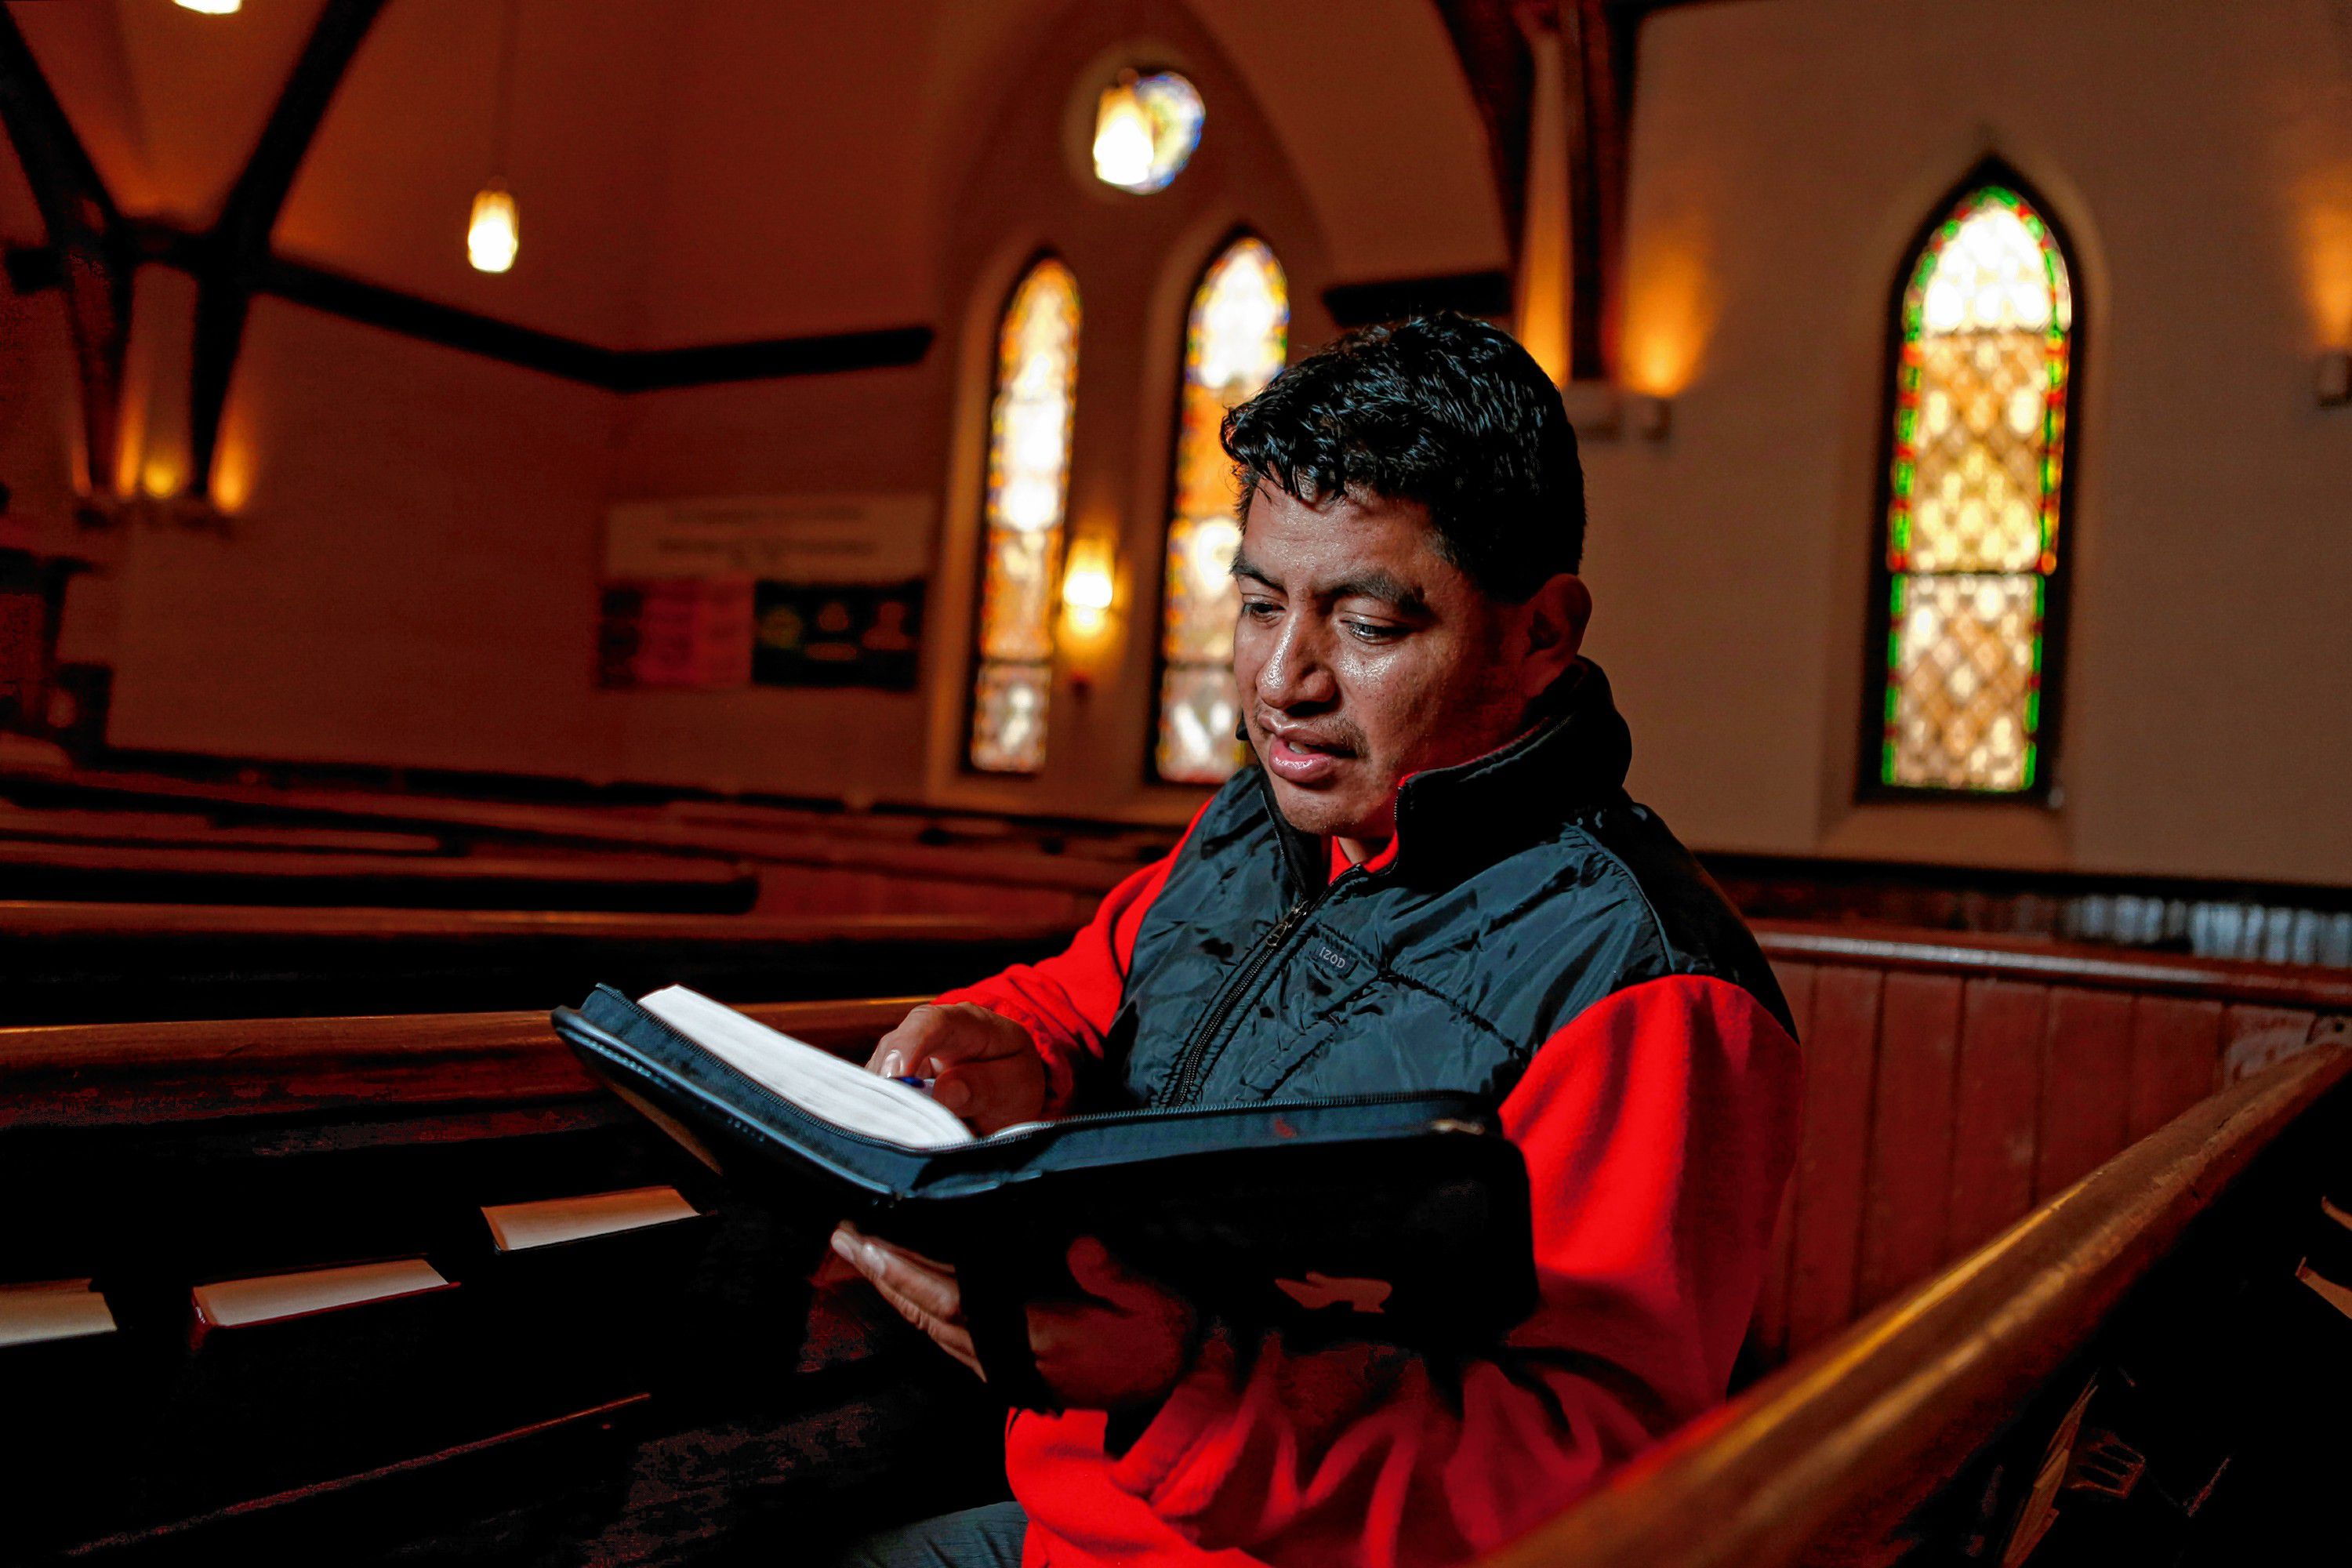 Undocumented immigrant Lucio Perez to speak at potluck at Amherst church where he takes sanctuary